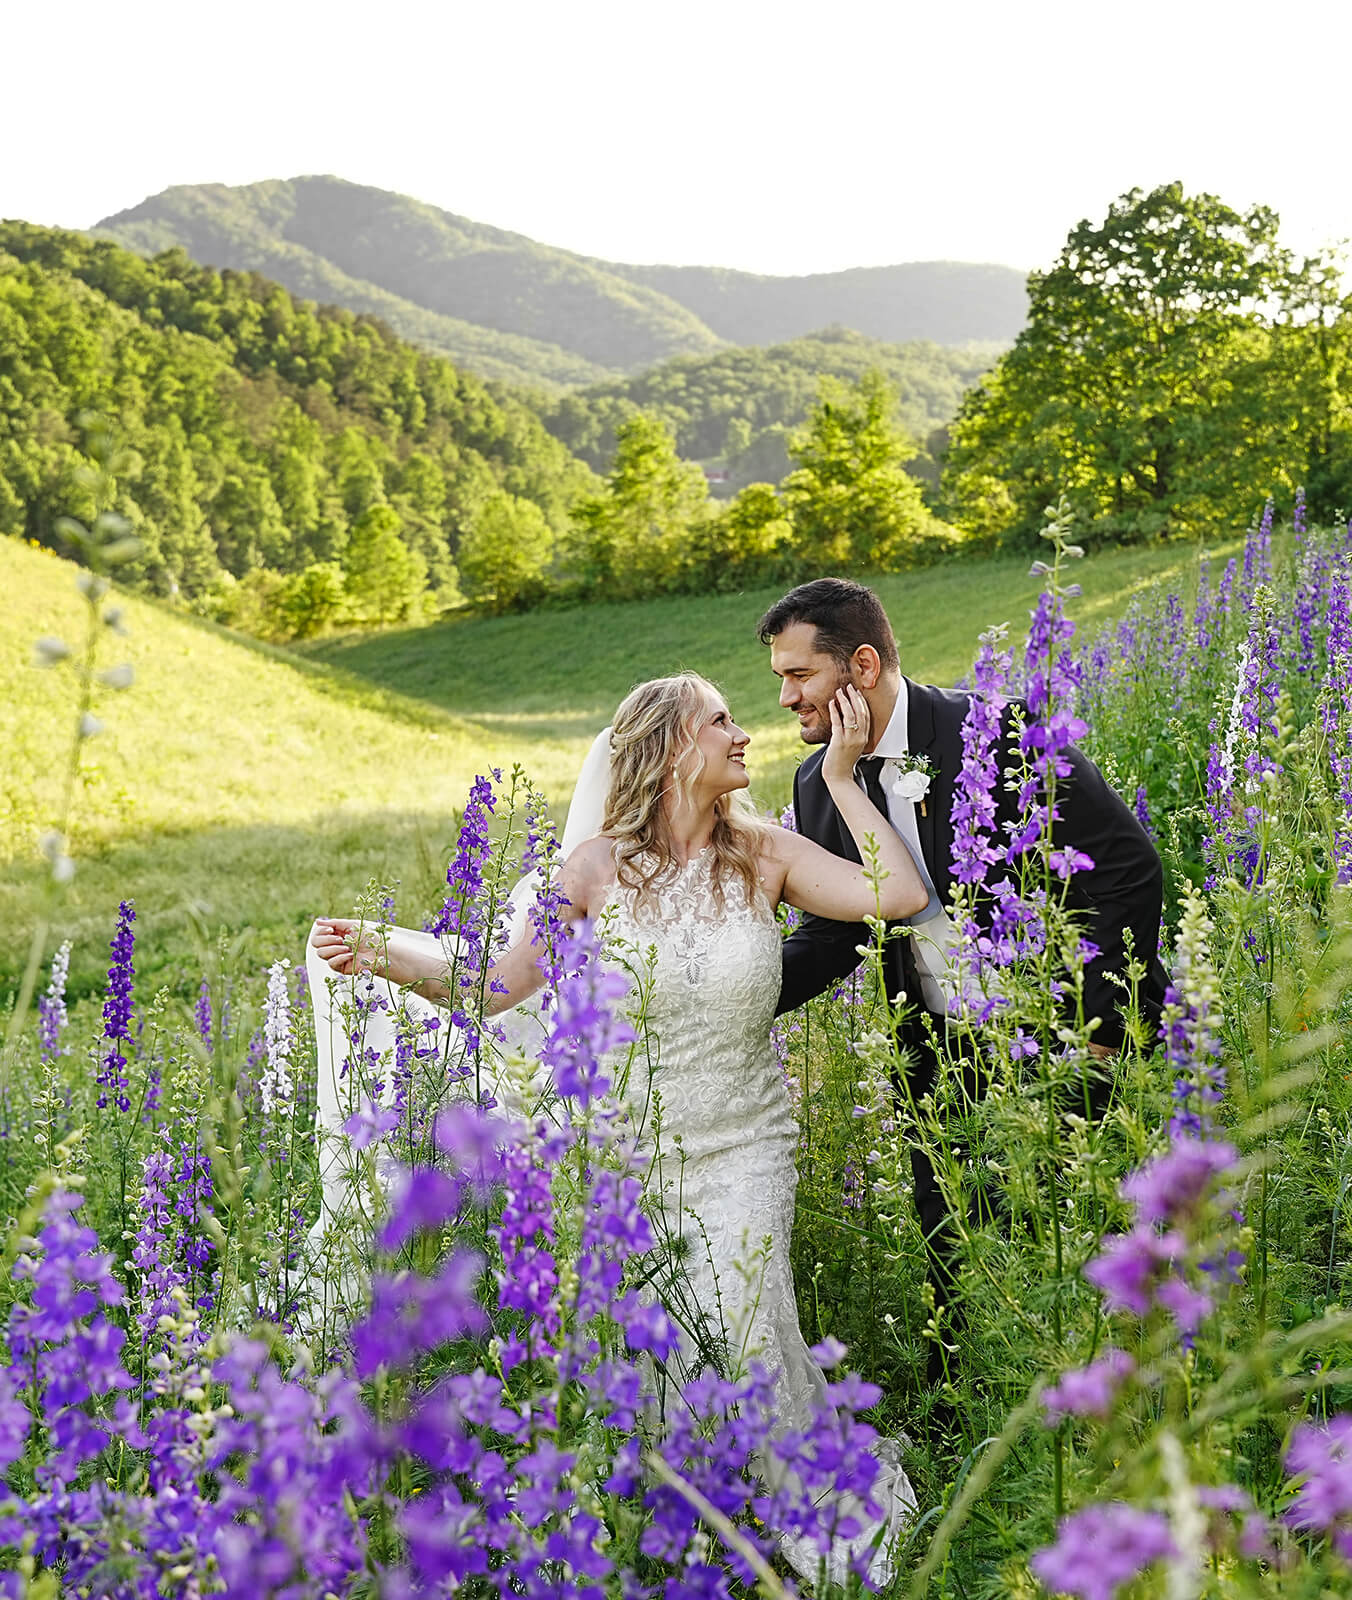 Bride holding her veil and touching her husband's cheek in a field of purple larkspur wildflowers with a mountain view behind them